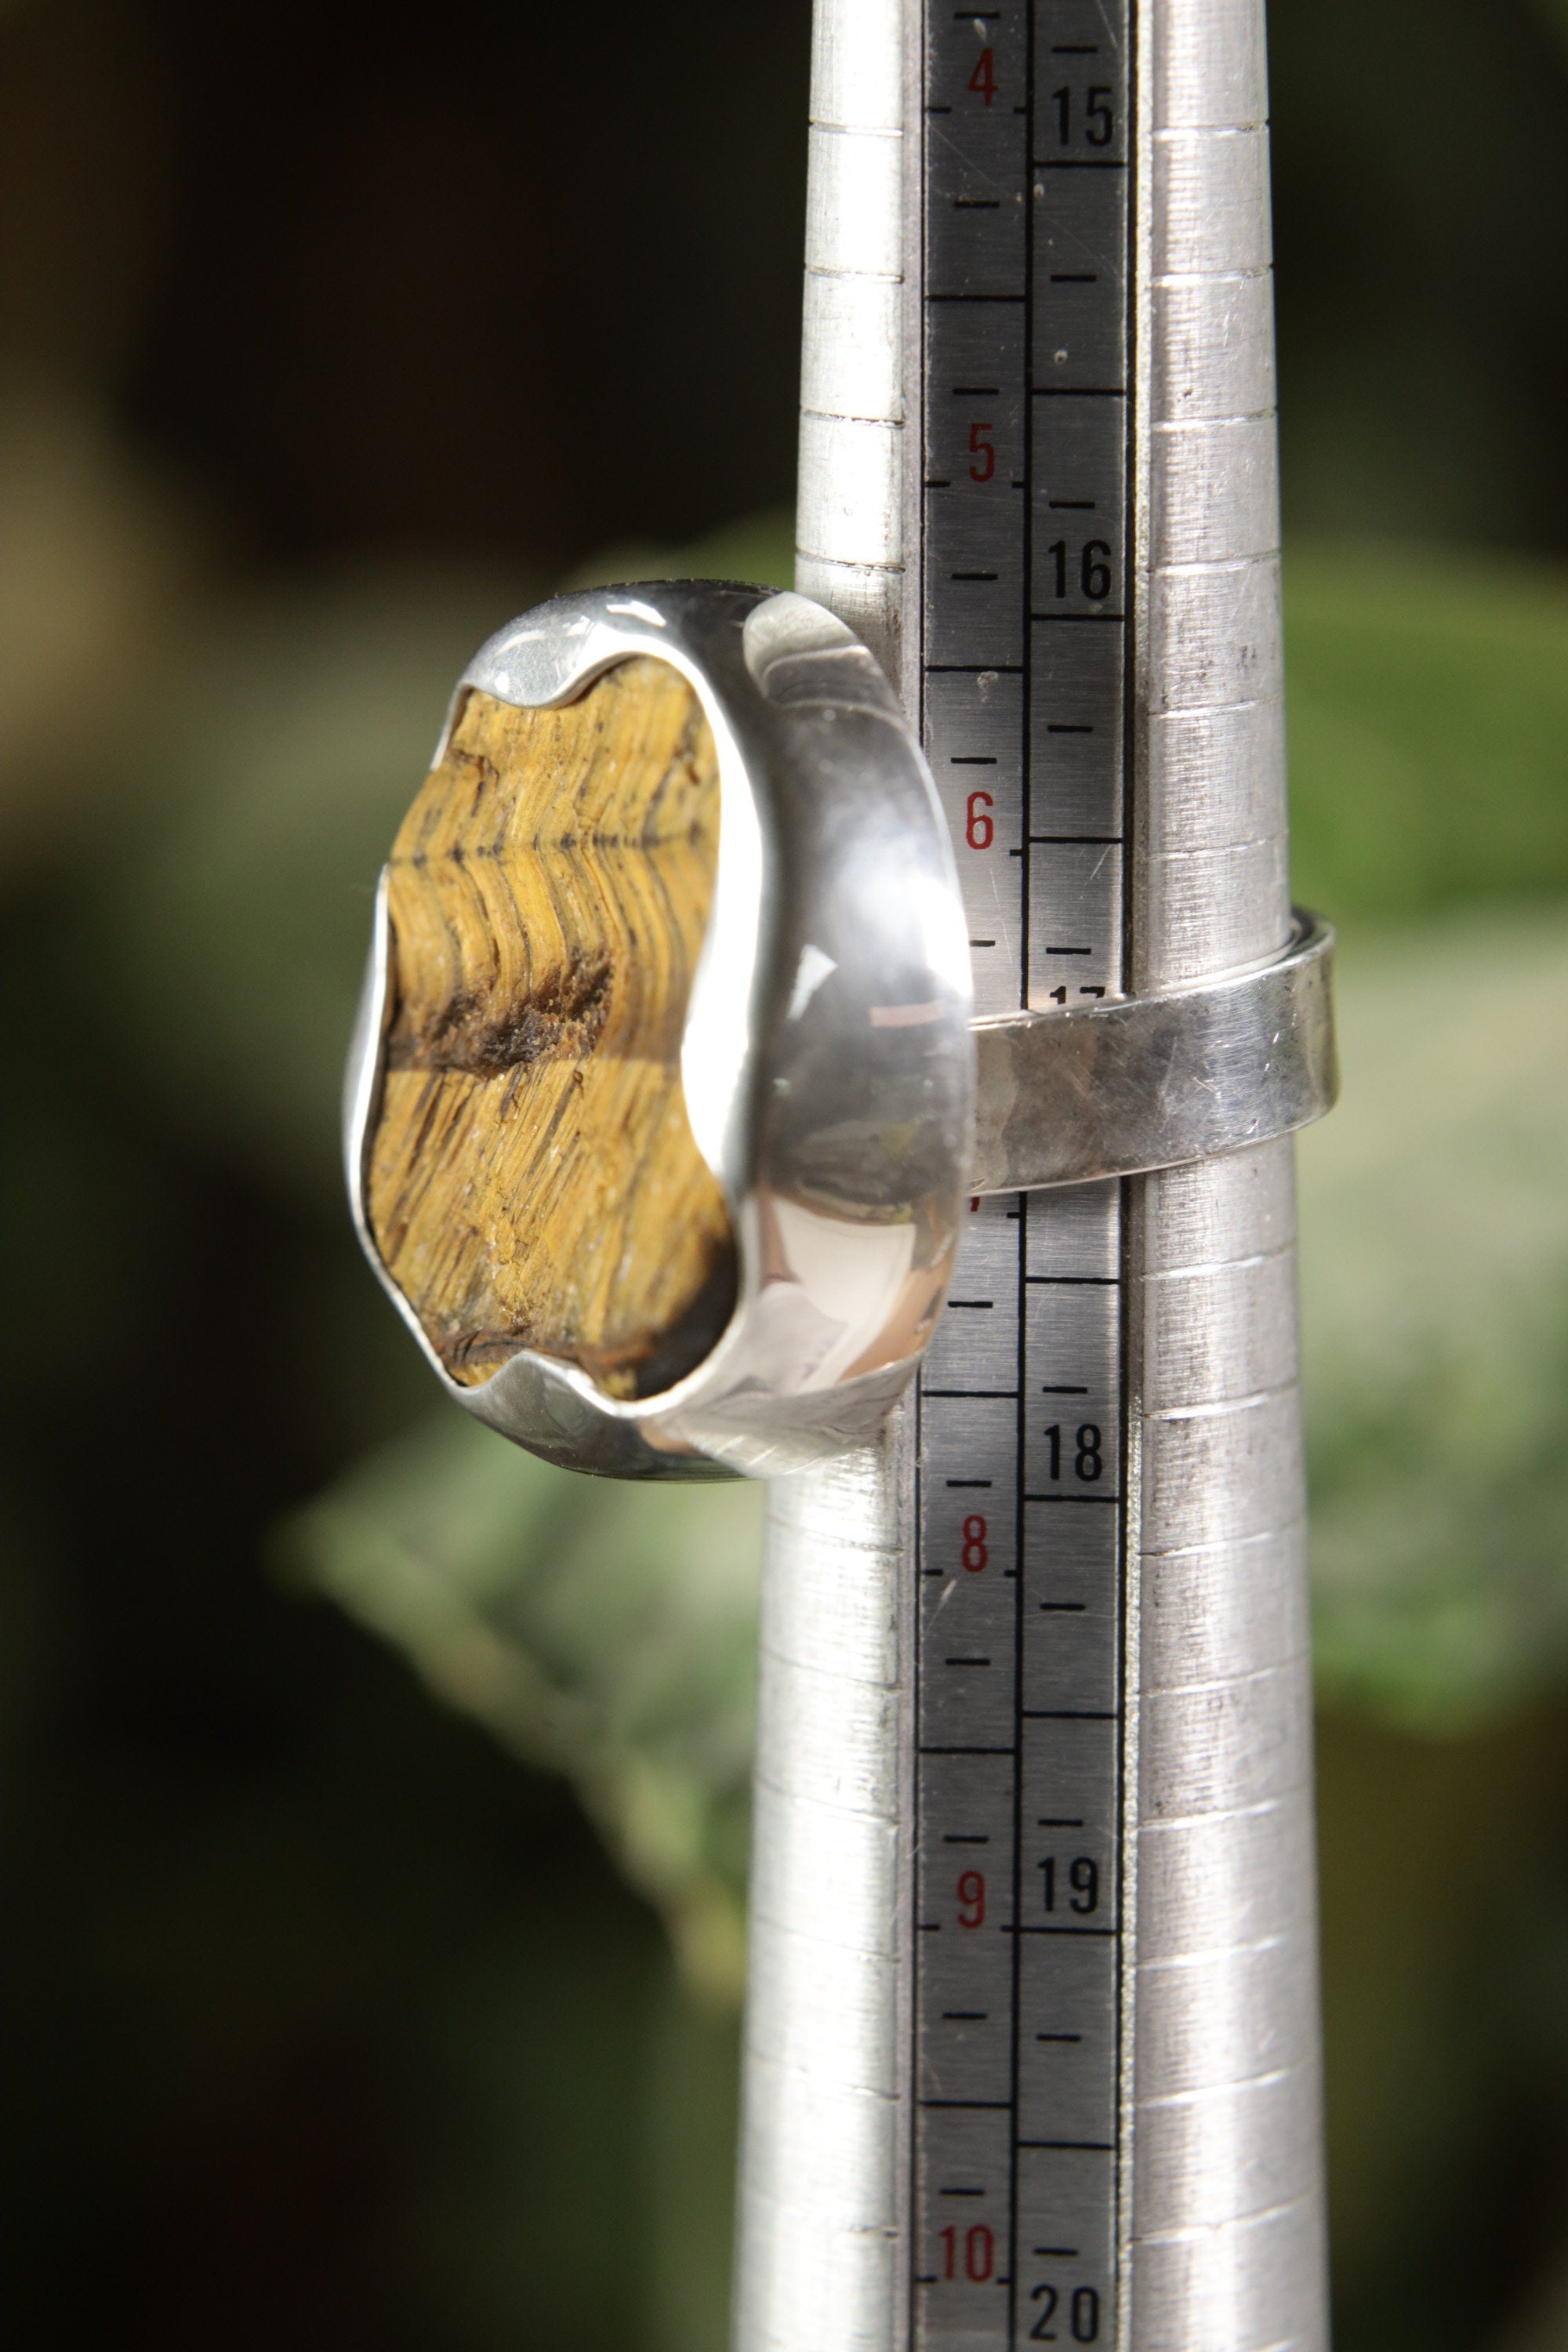 A Sturdy Embrace of Wild Vigor: Adjustable Sterling Silver Ring with Raw Tiger Eye - Unisex - Size 5-12 US